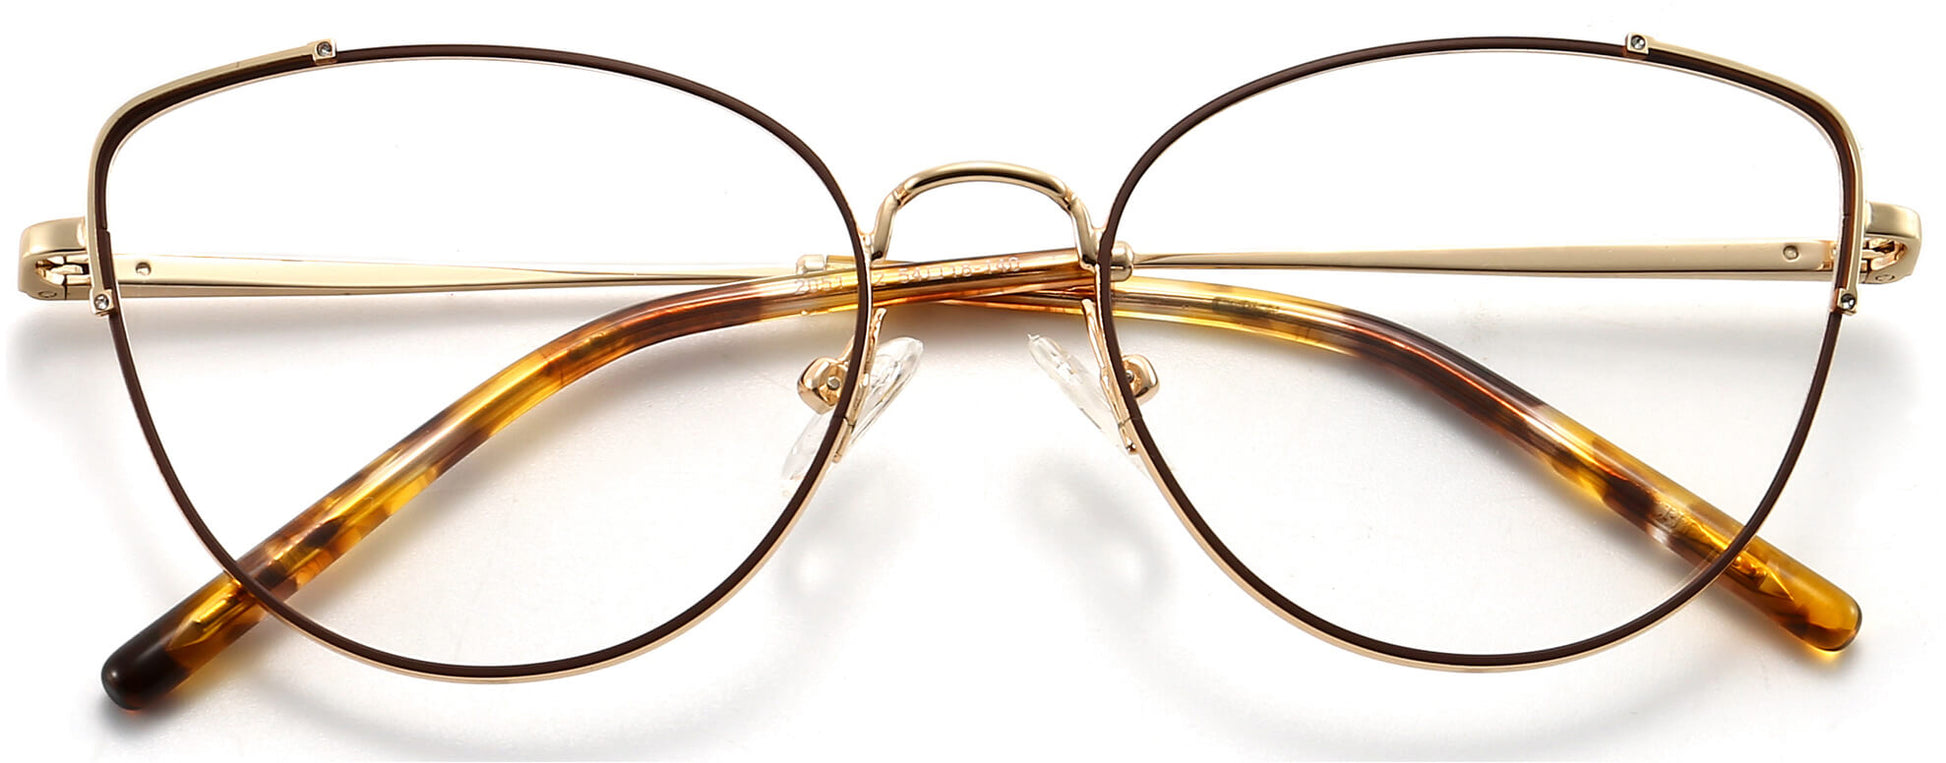 Palermo cateye  metal gold Eyeglasses from ANRRI, closed view